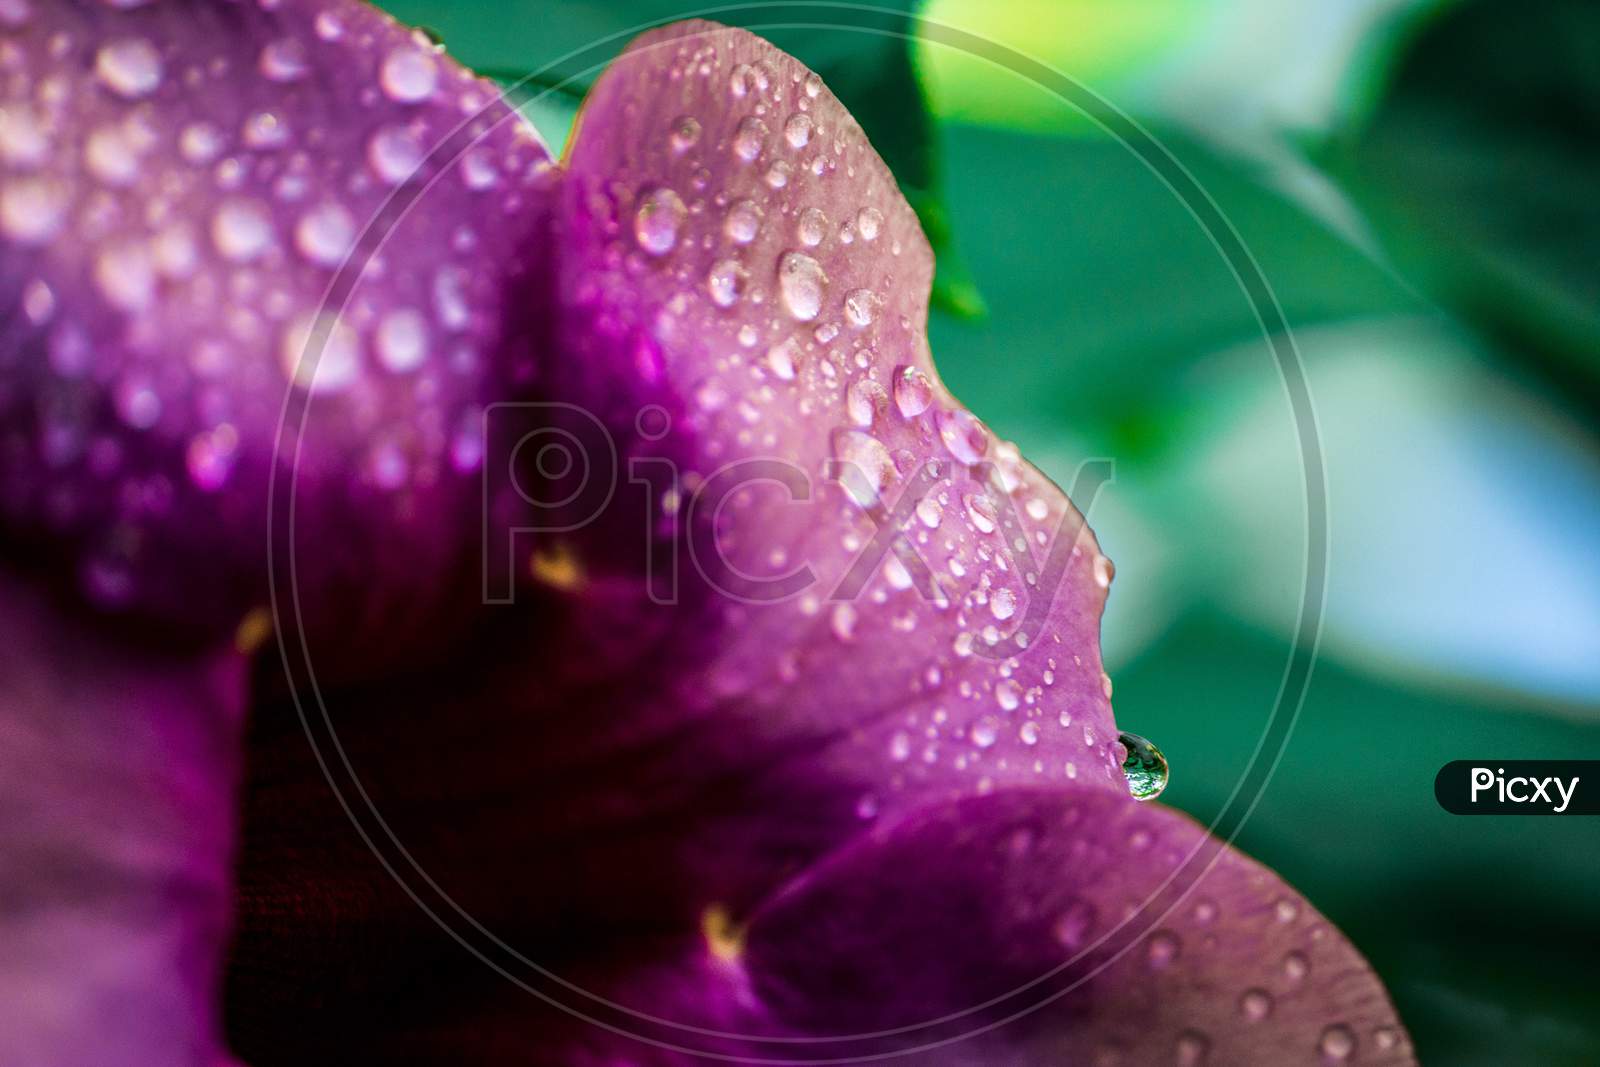 Pink Blooming Flower On Plant Closeup With Water Droplets